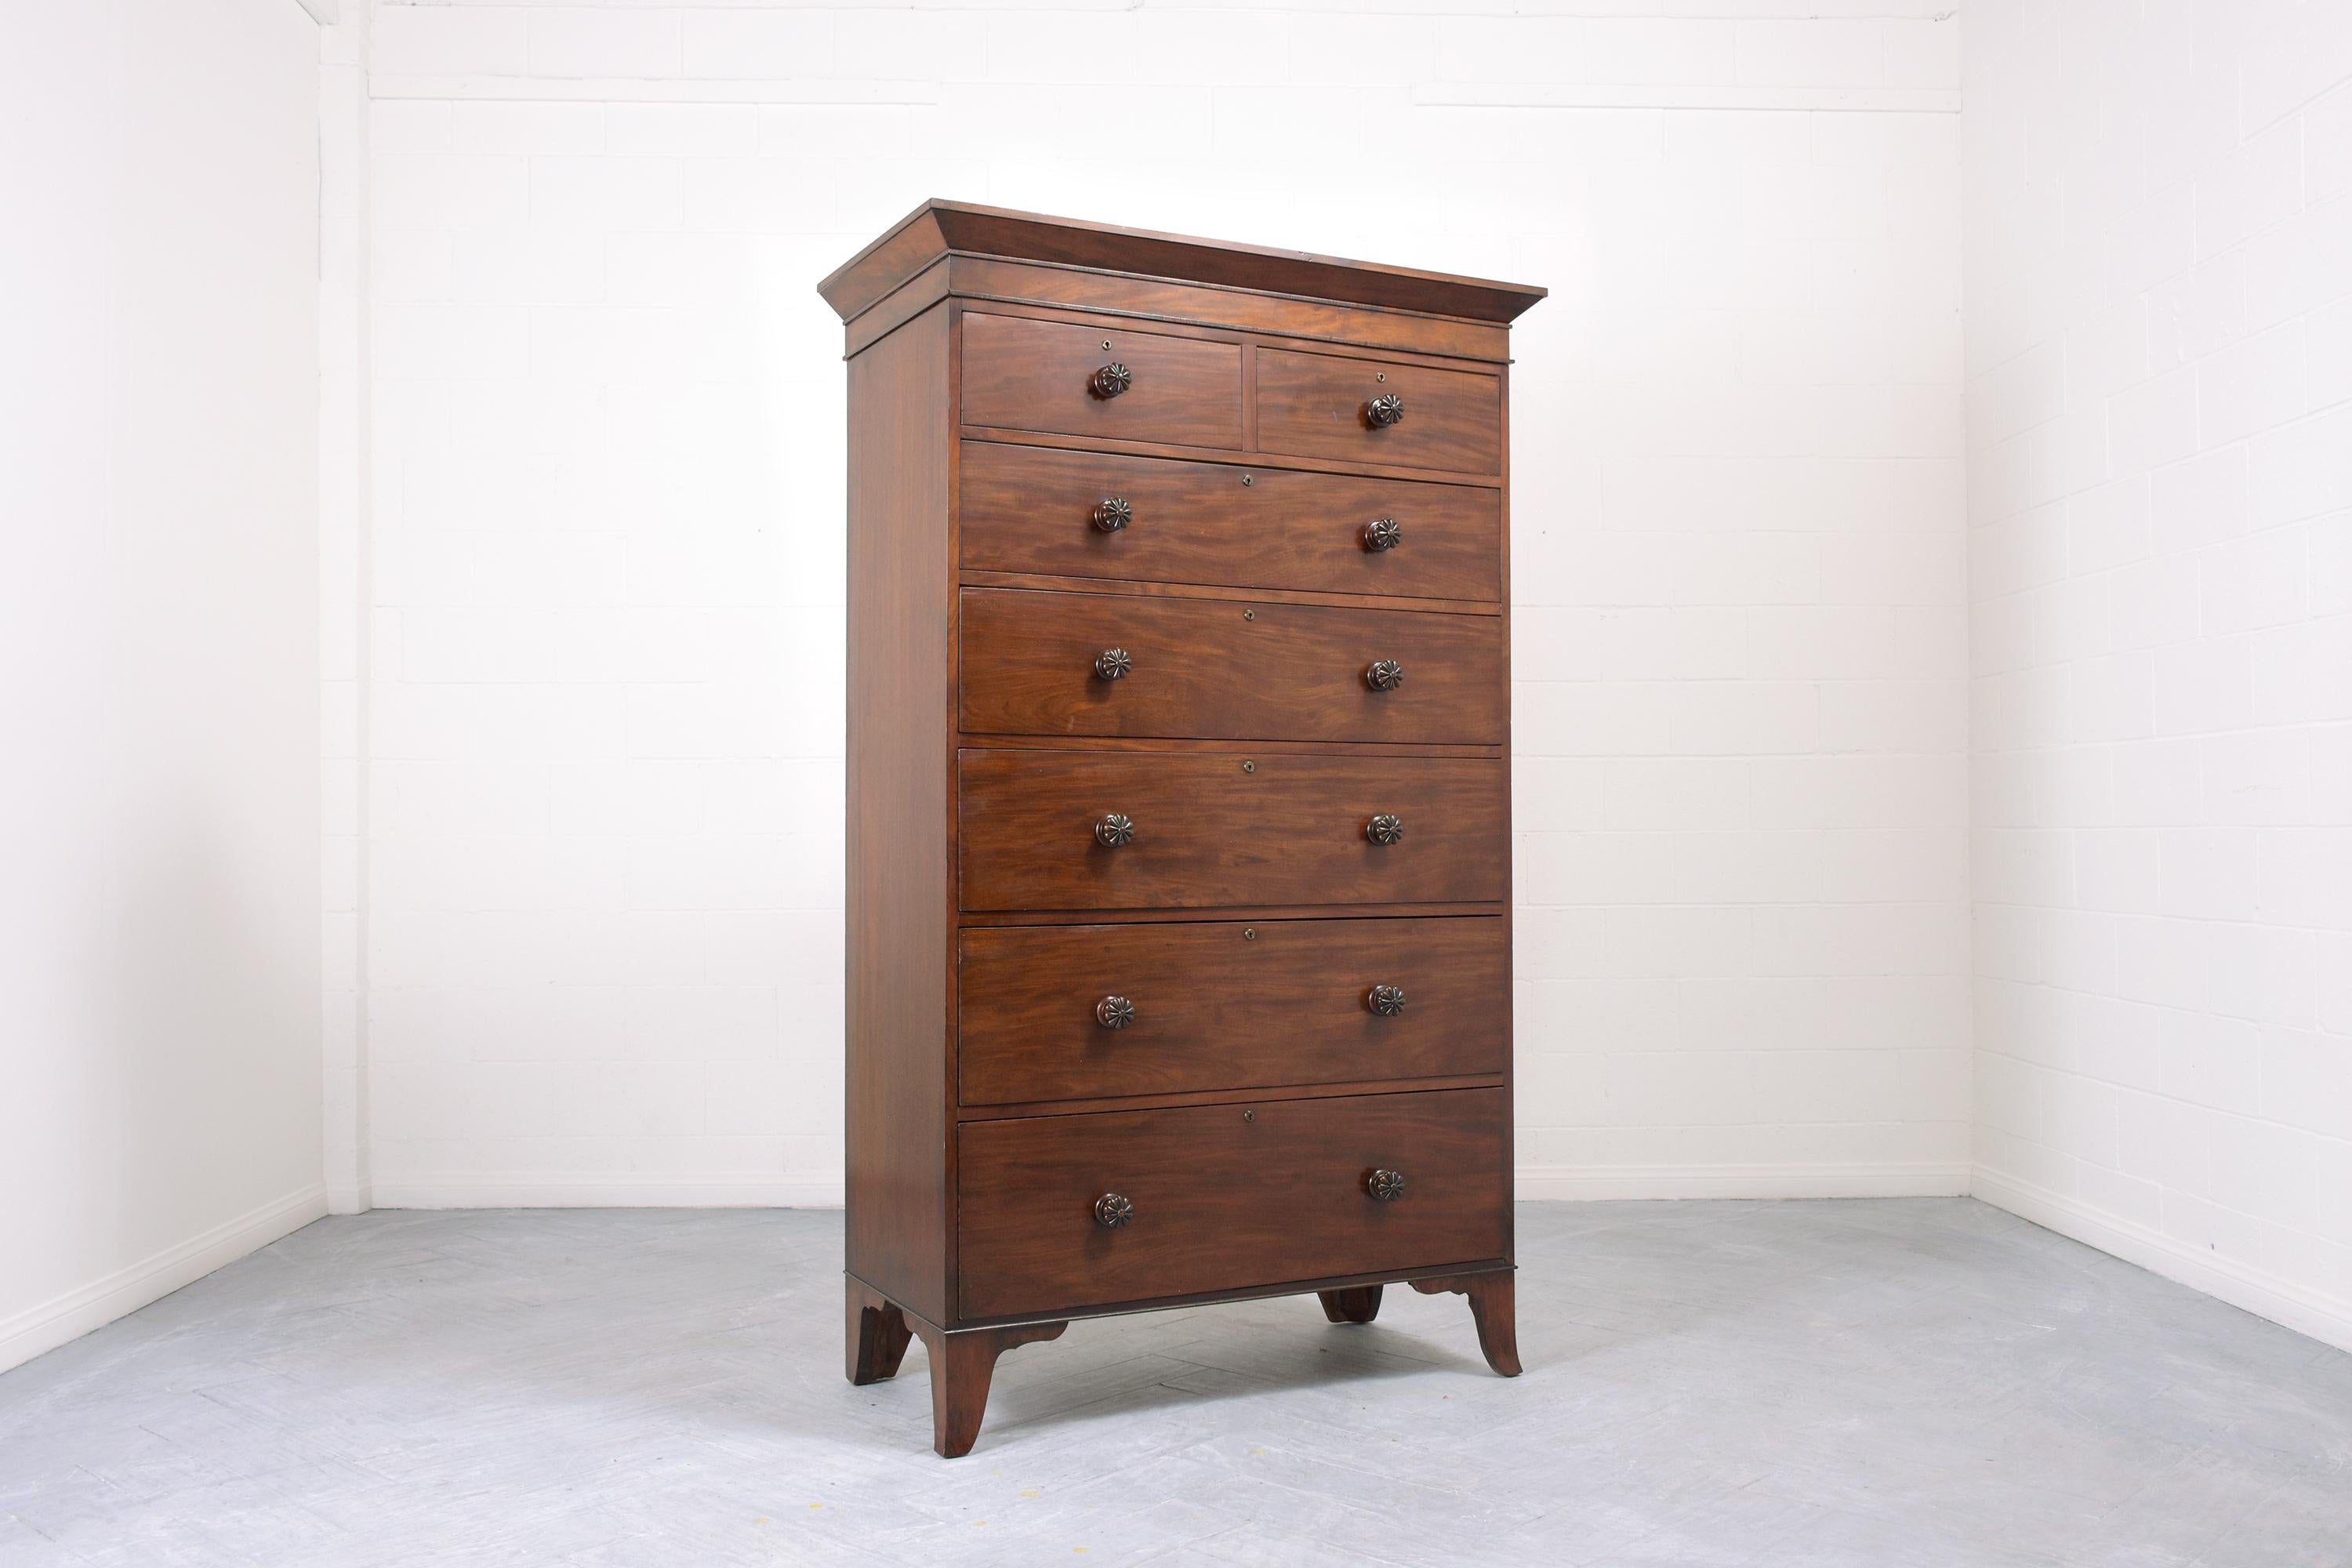 English 19th-Century American Classical Mahogany Tall Chest of Drawers For Sale